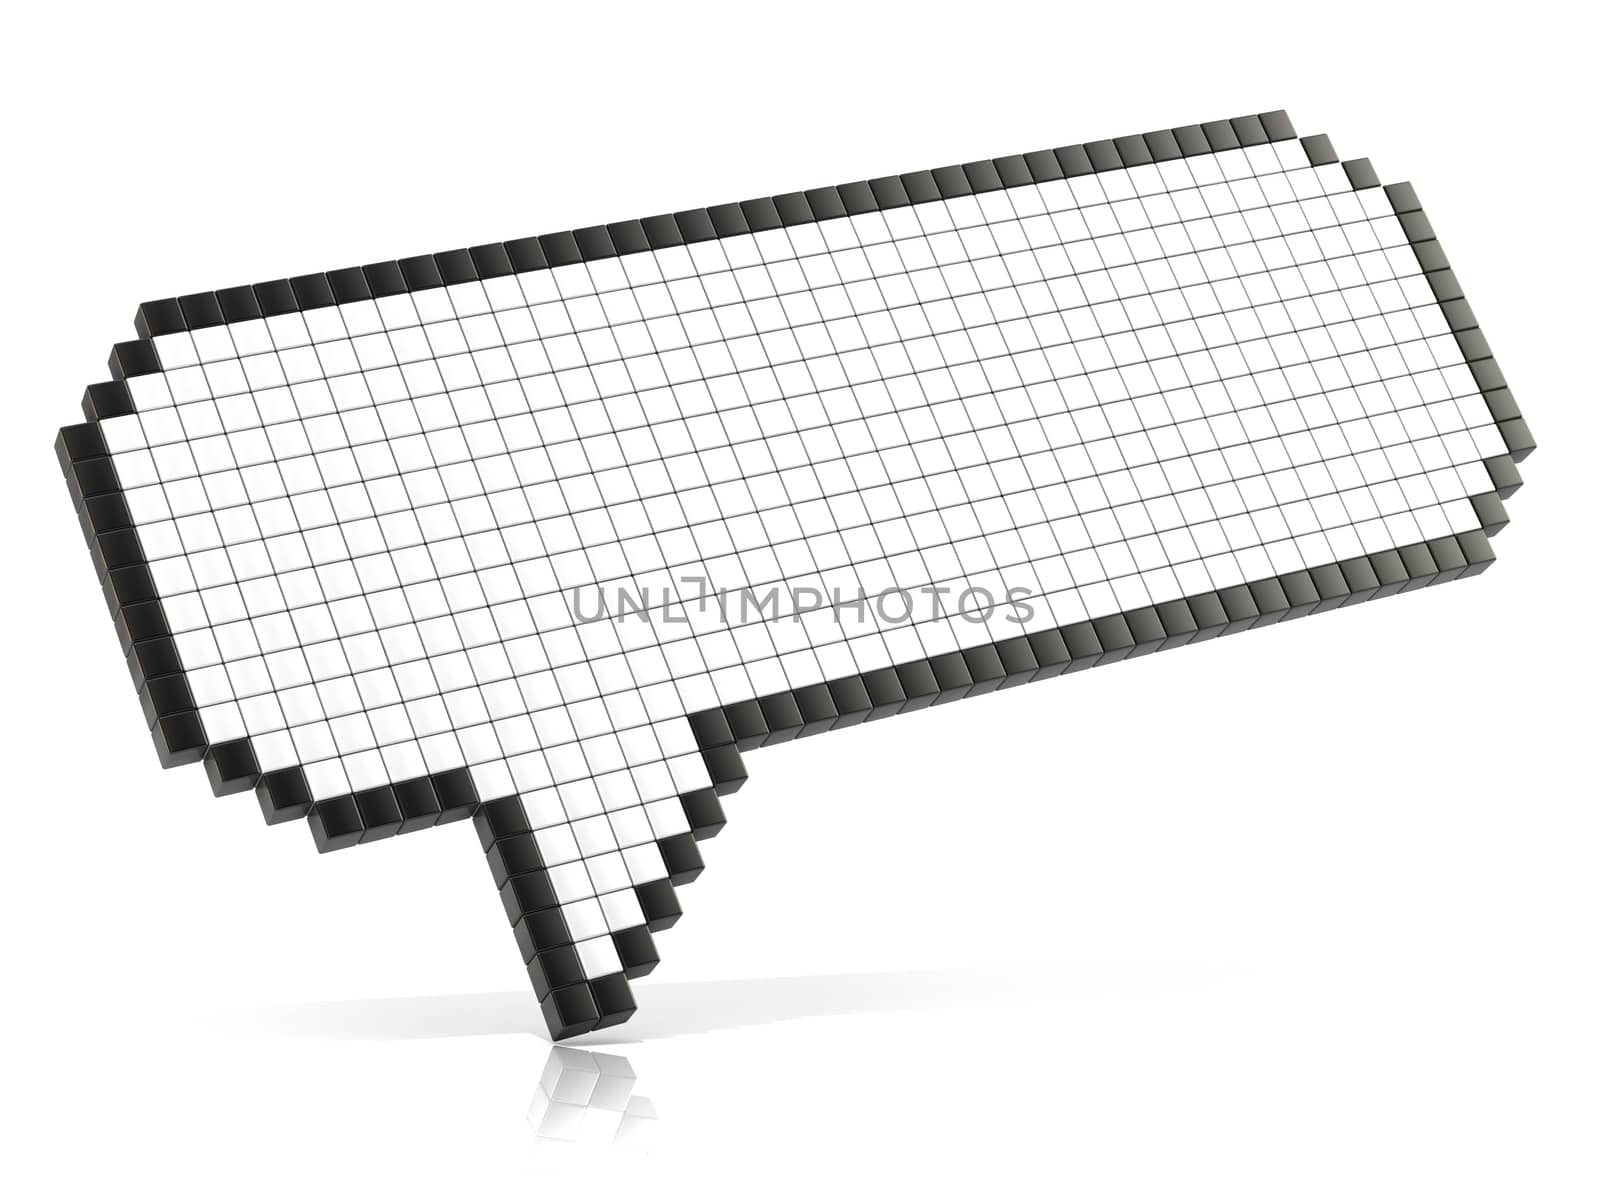 Pixel speech bubble made of glossy cubes. 3D render illustration isolated on white background